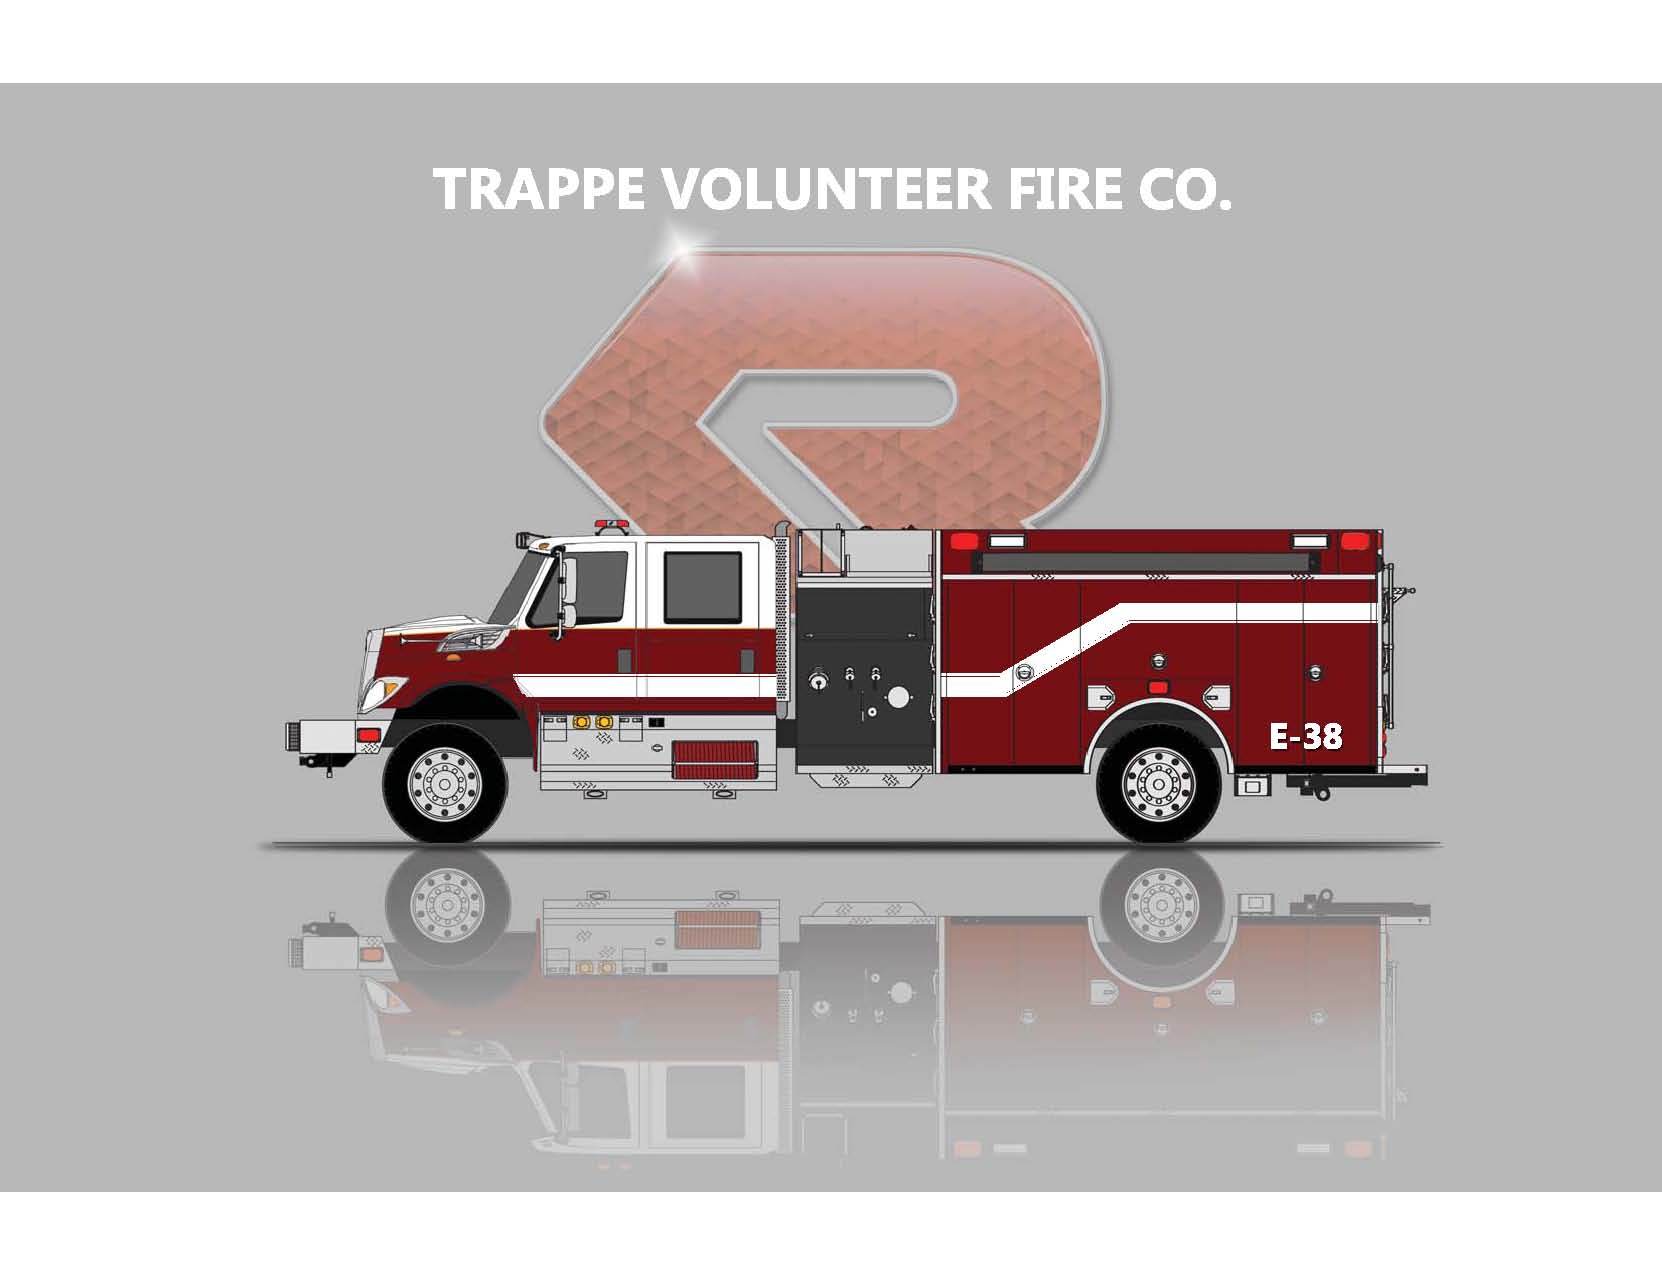 Featured image for “Trappe Volunteer Fire Co.”